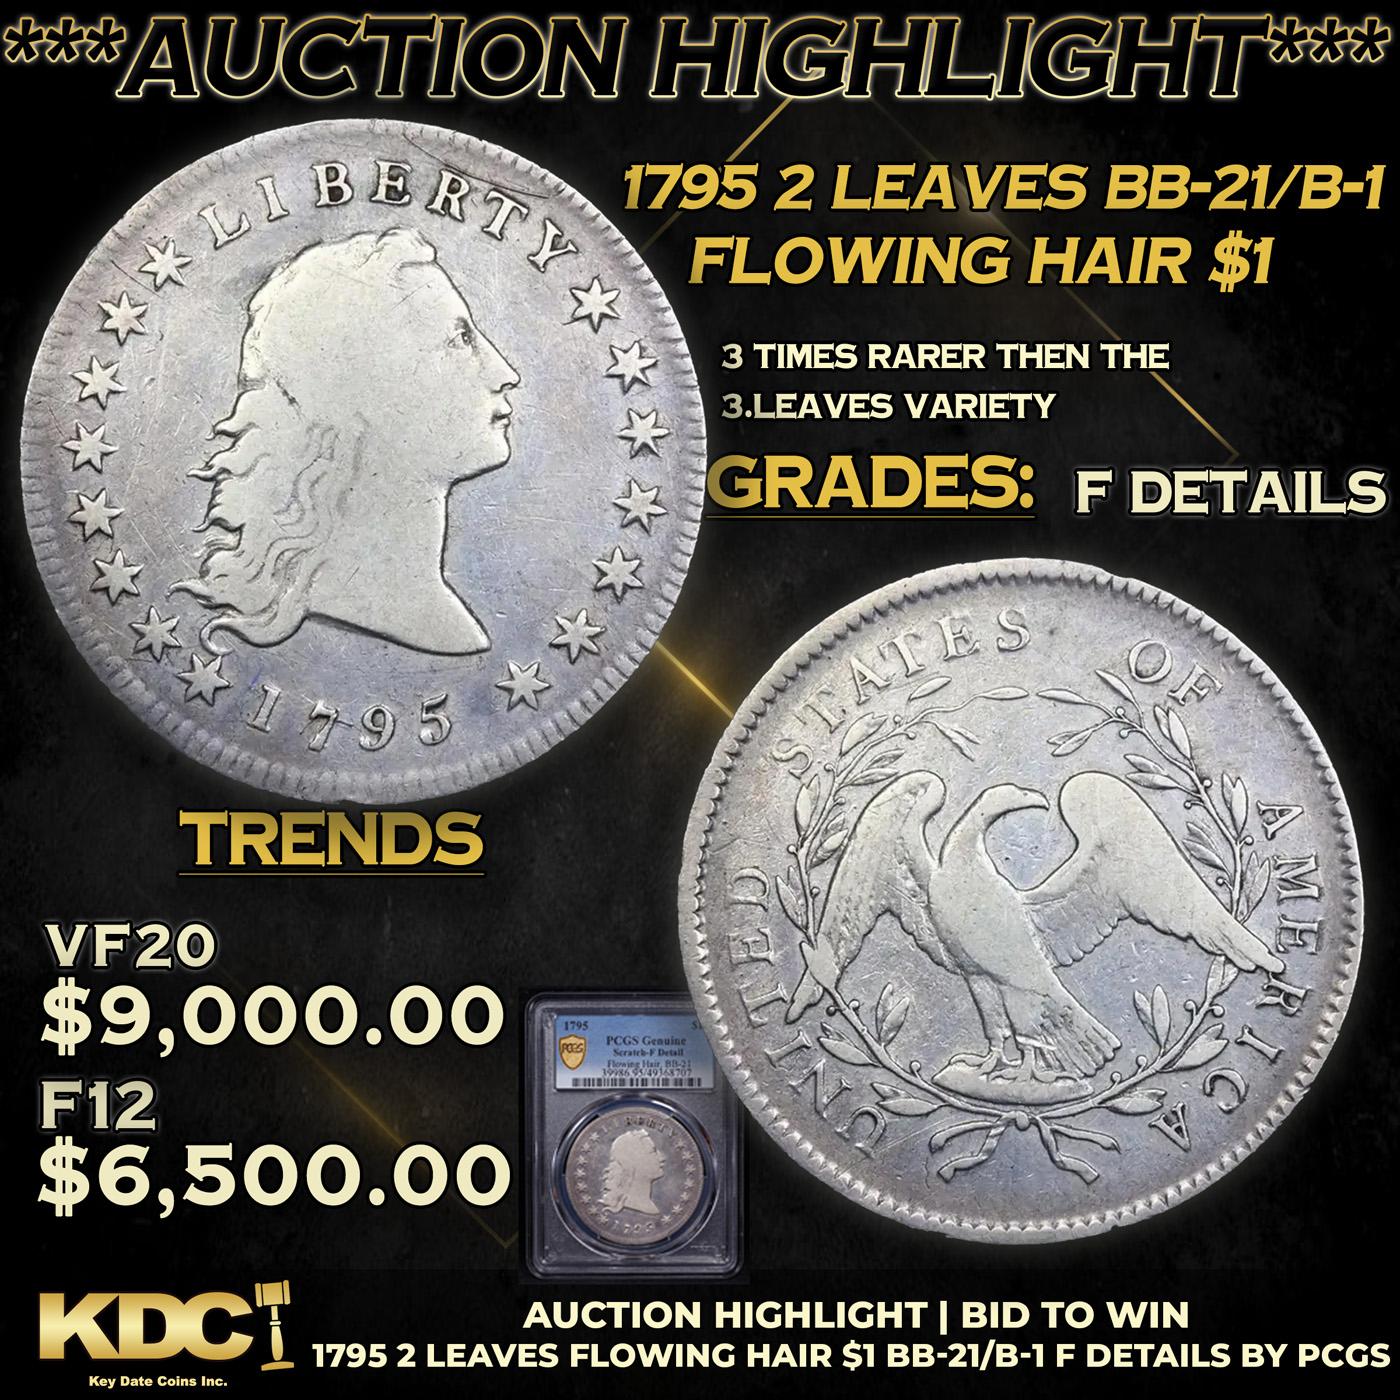 ***Auction Highlight*** PCGS 1795 2 Leaves Flowing Hair Dollar $1 BB-21/B-1 Graded f details By PCGS